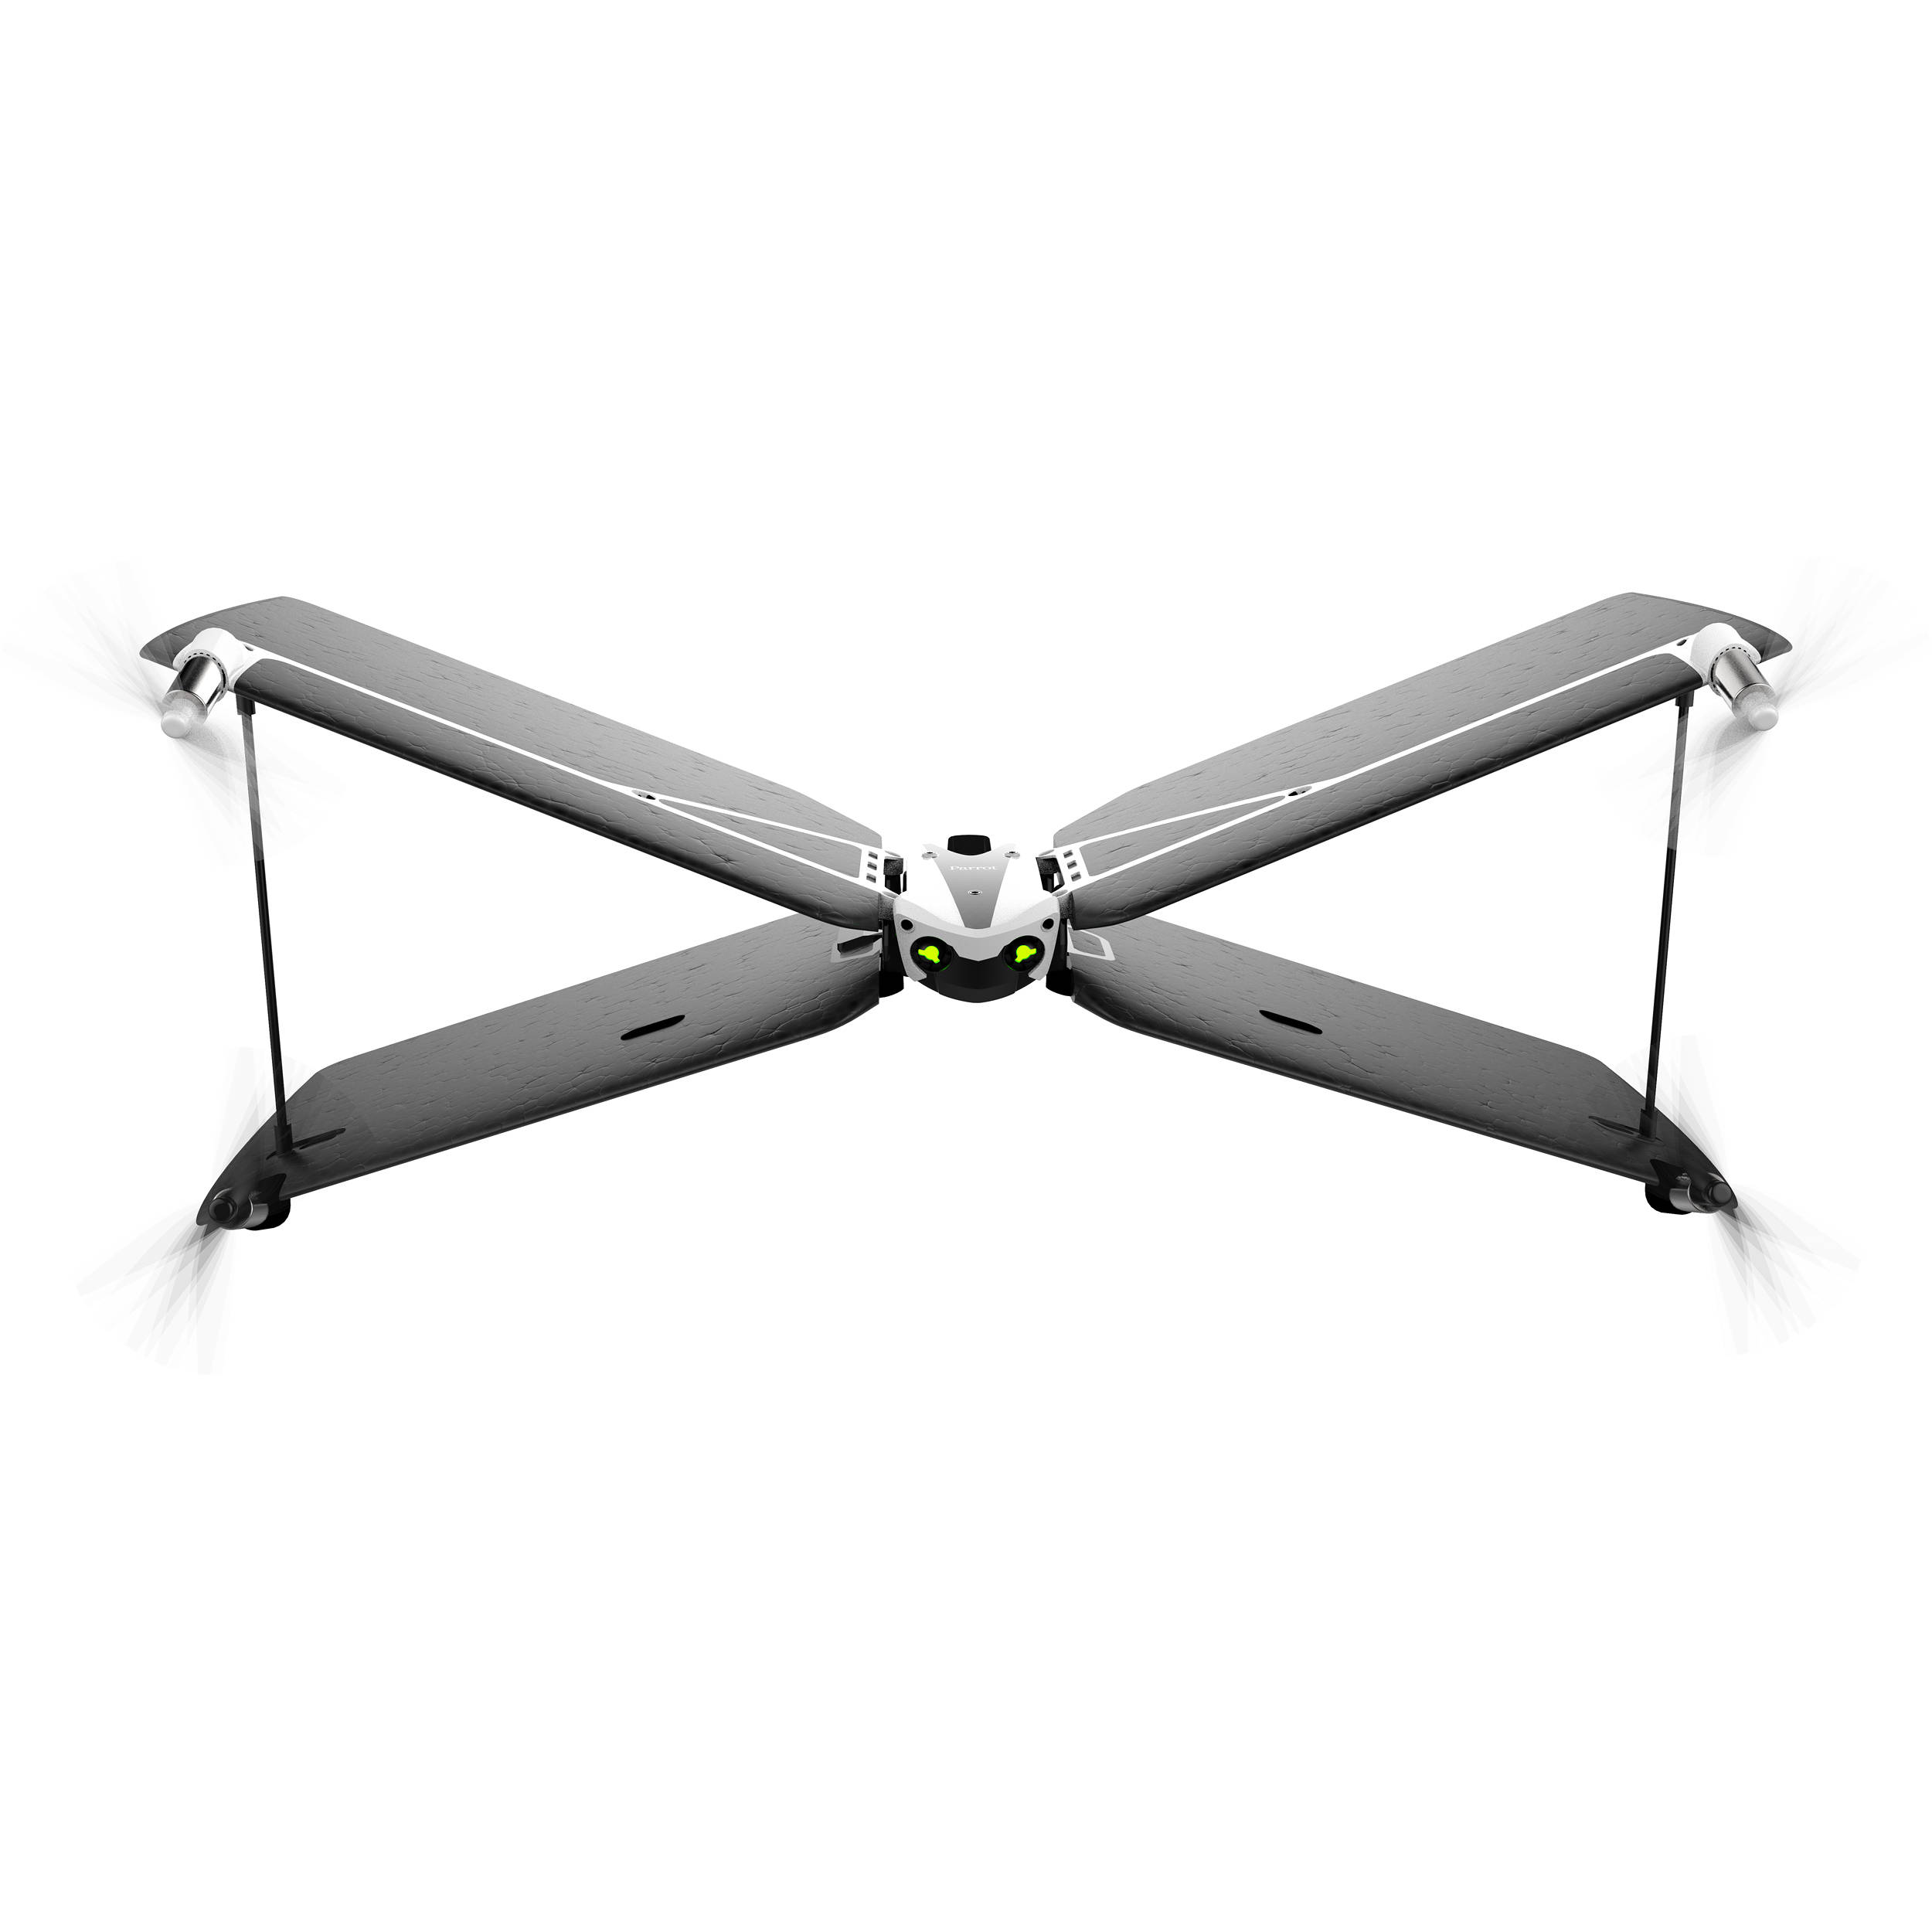 Detail Parrot Swing Quadcopter Drone Nomer 11